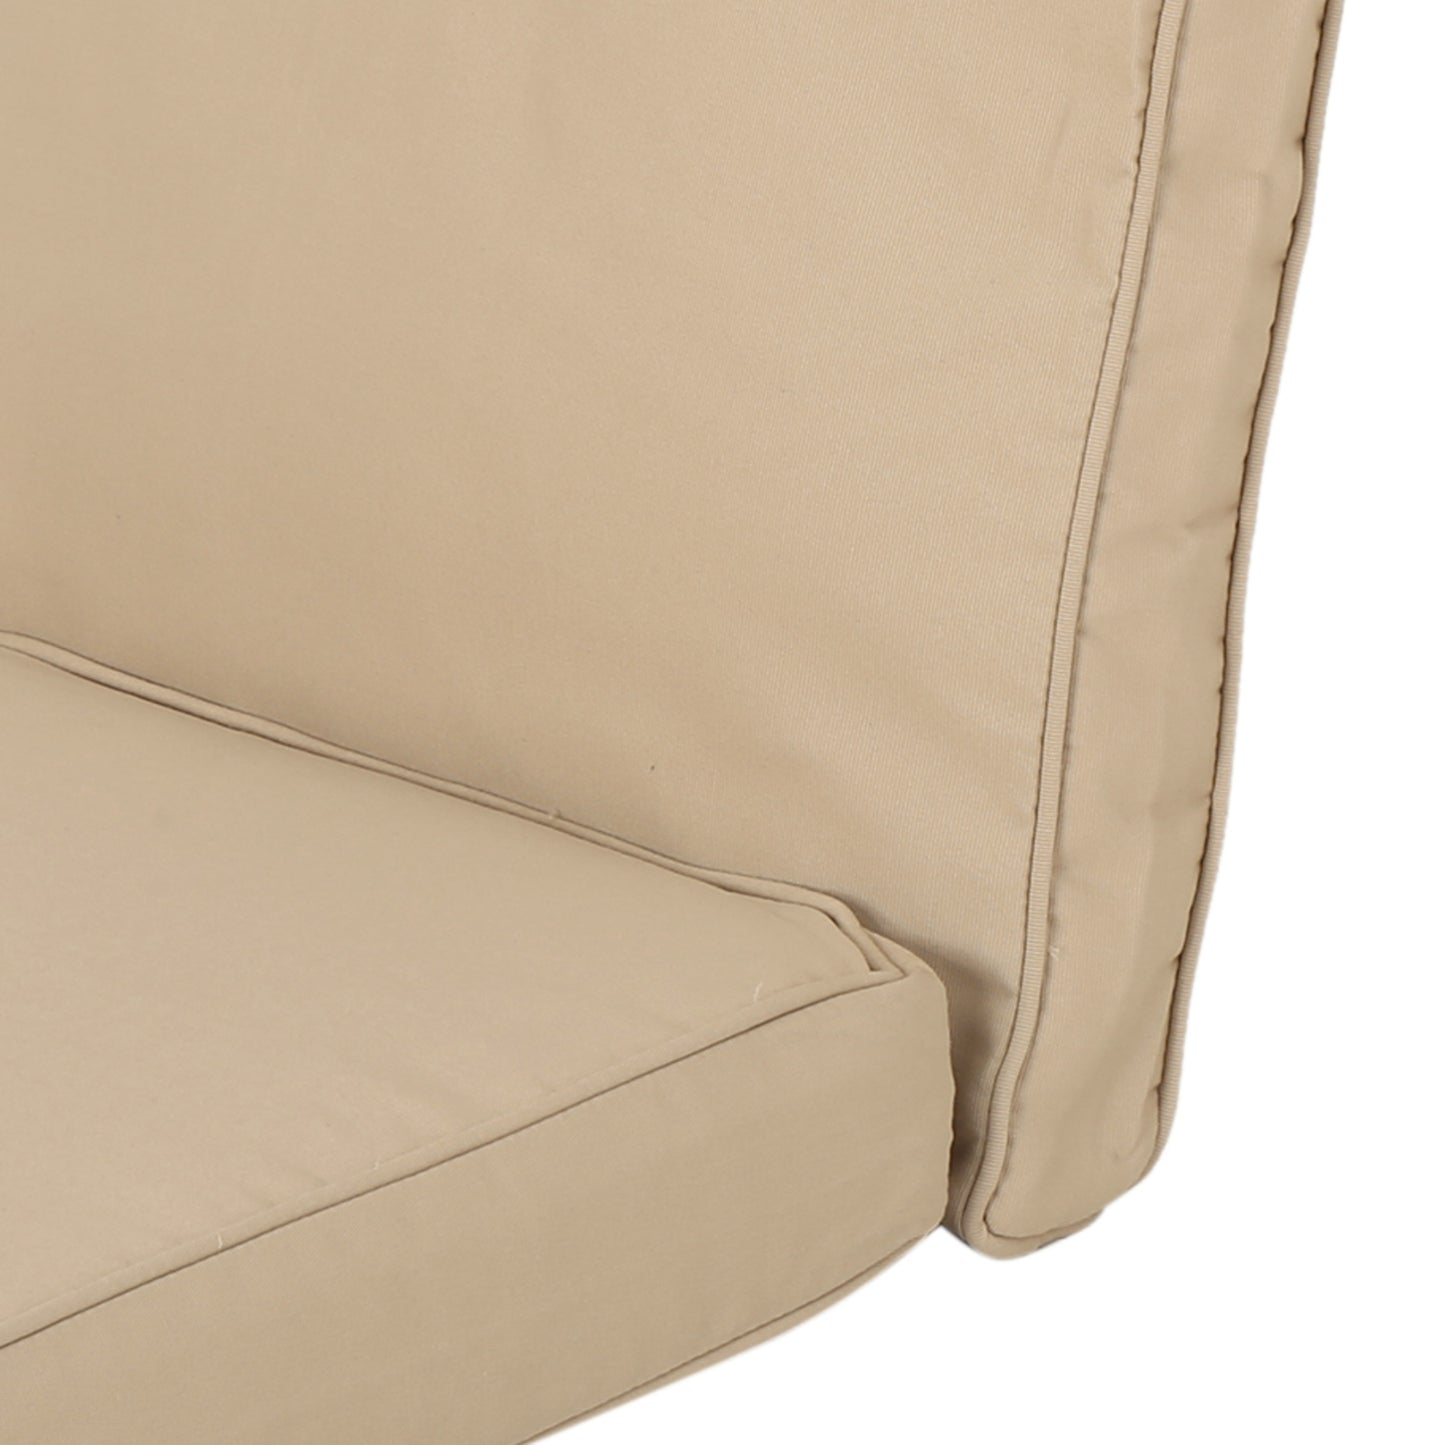 Atiyah Outdoor Water Resistant Fabric Loveseat and Club Chair Cushions